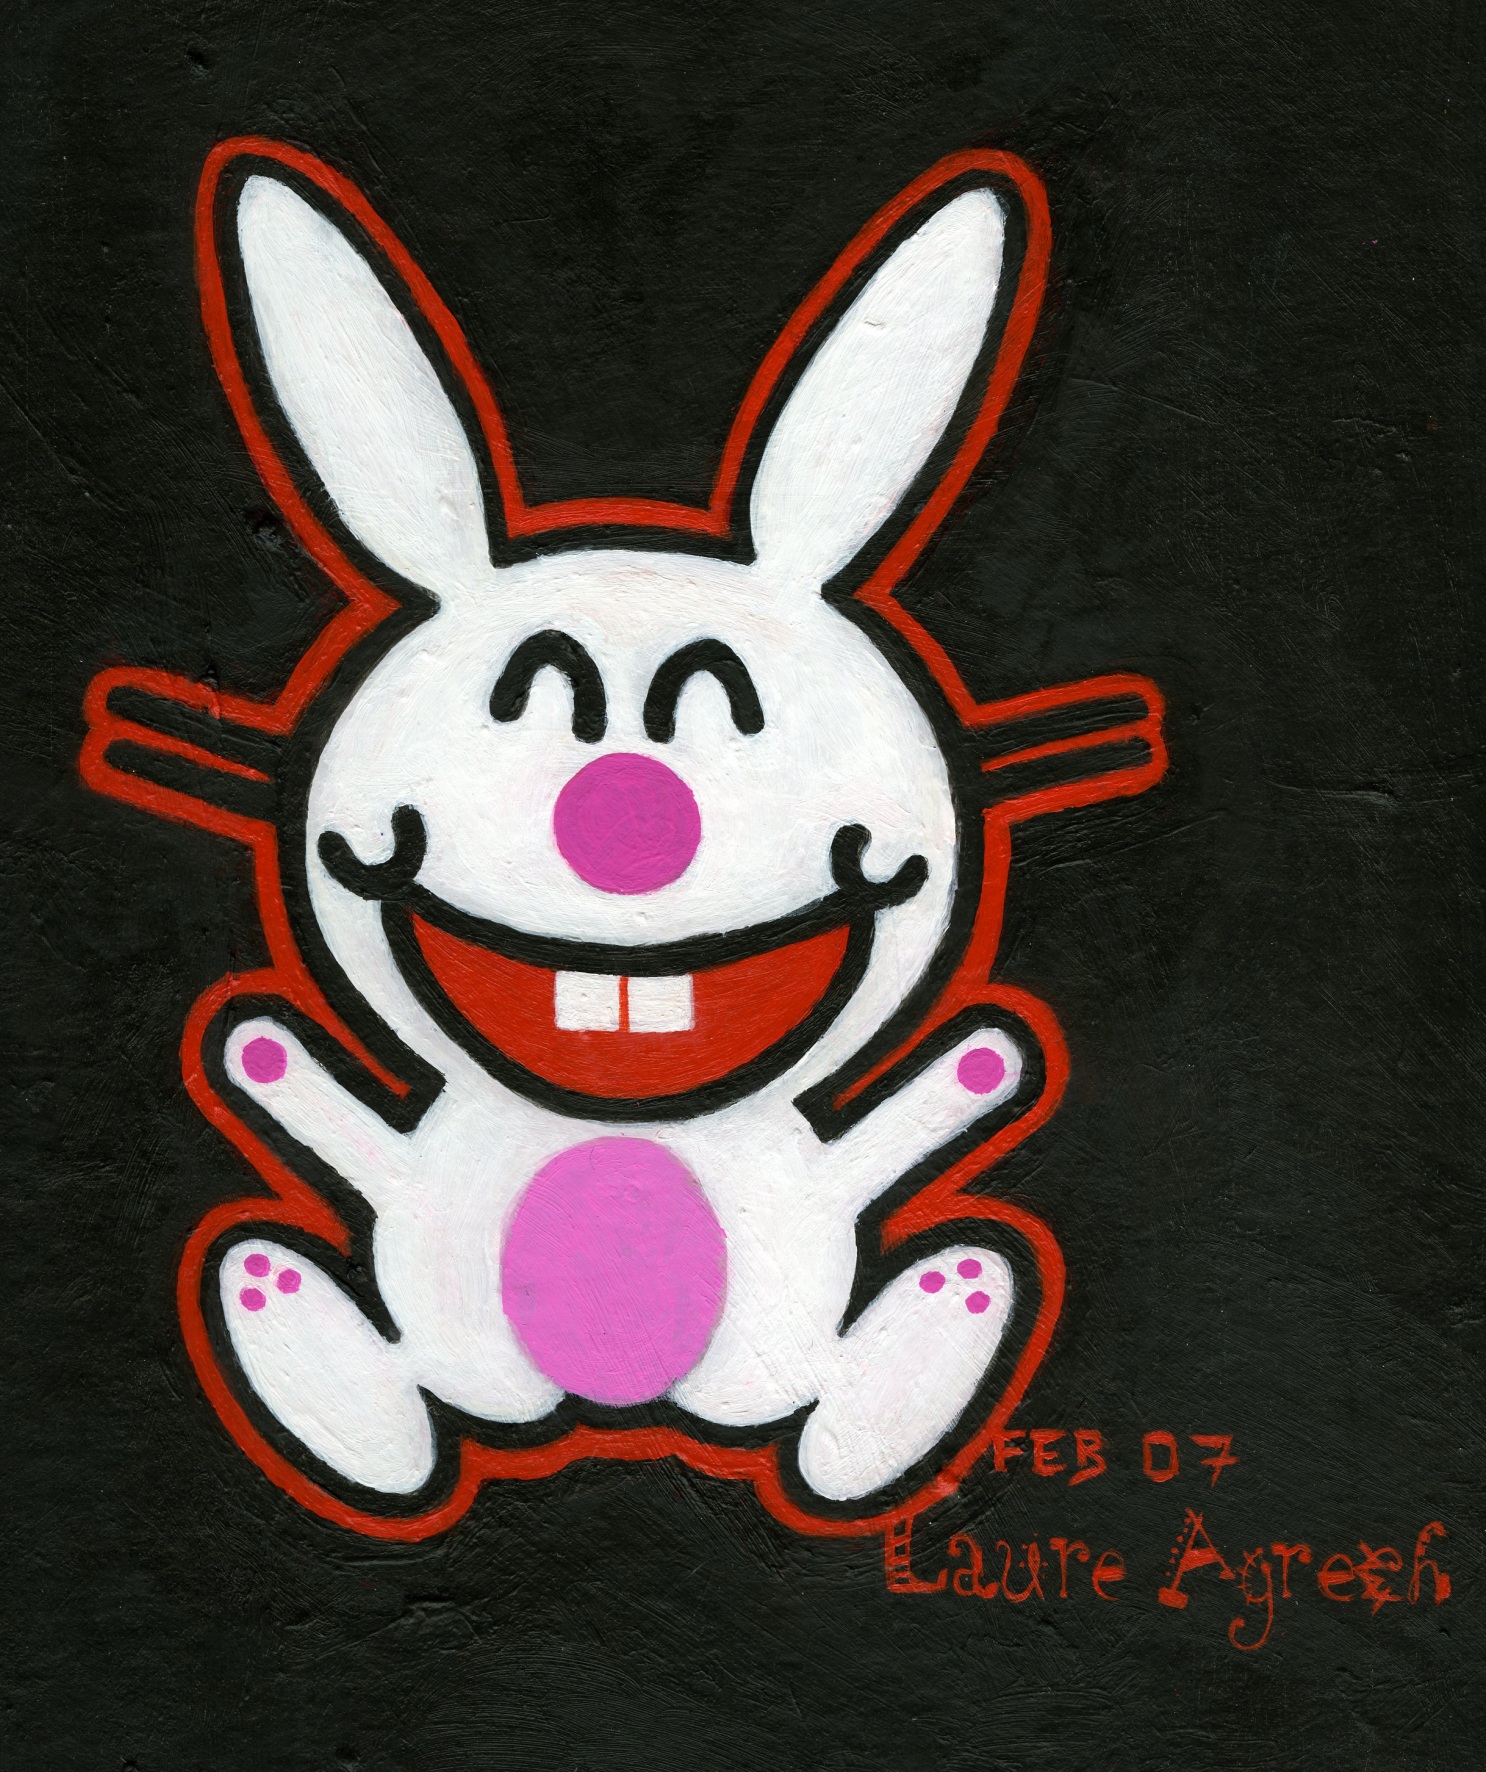 Find more happy bunny by miouhswings. happy bunny by miouhswings 1486x1772....